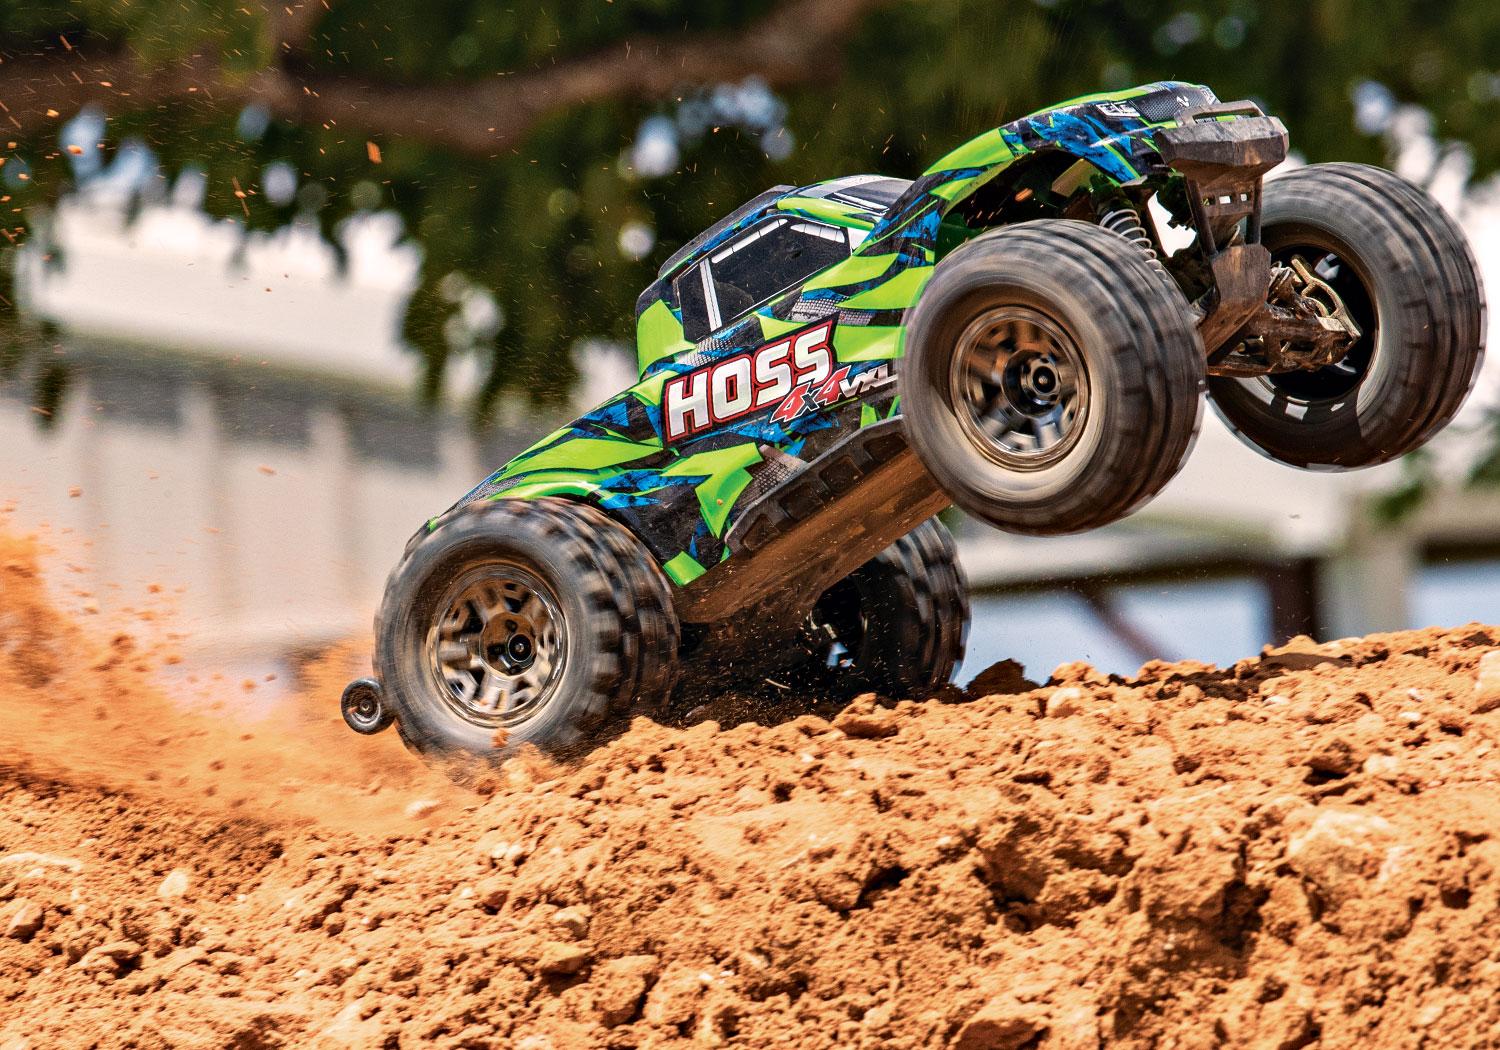 Traxxas Gas Powered Rc Cars: Next-Level Features for Maximum Performance